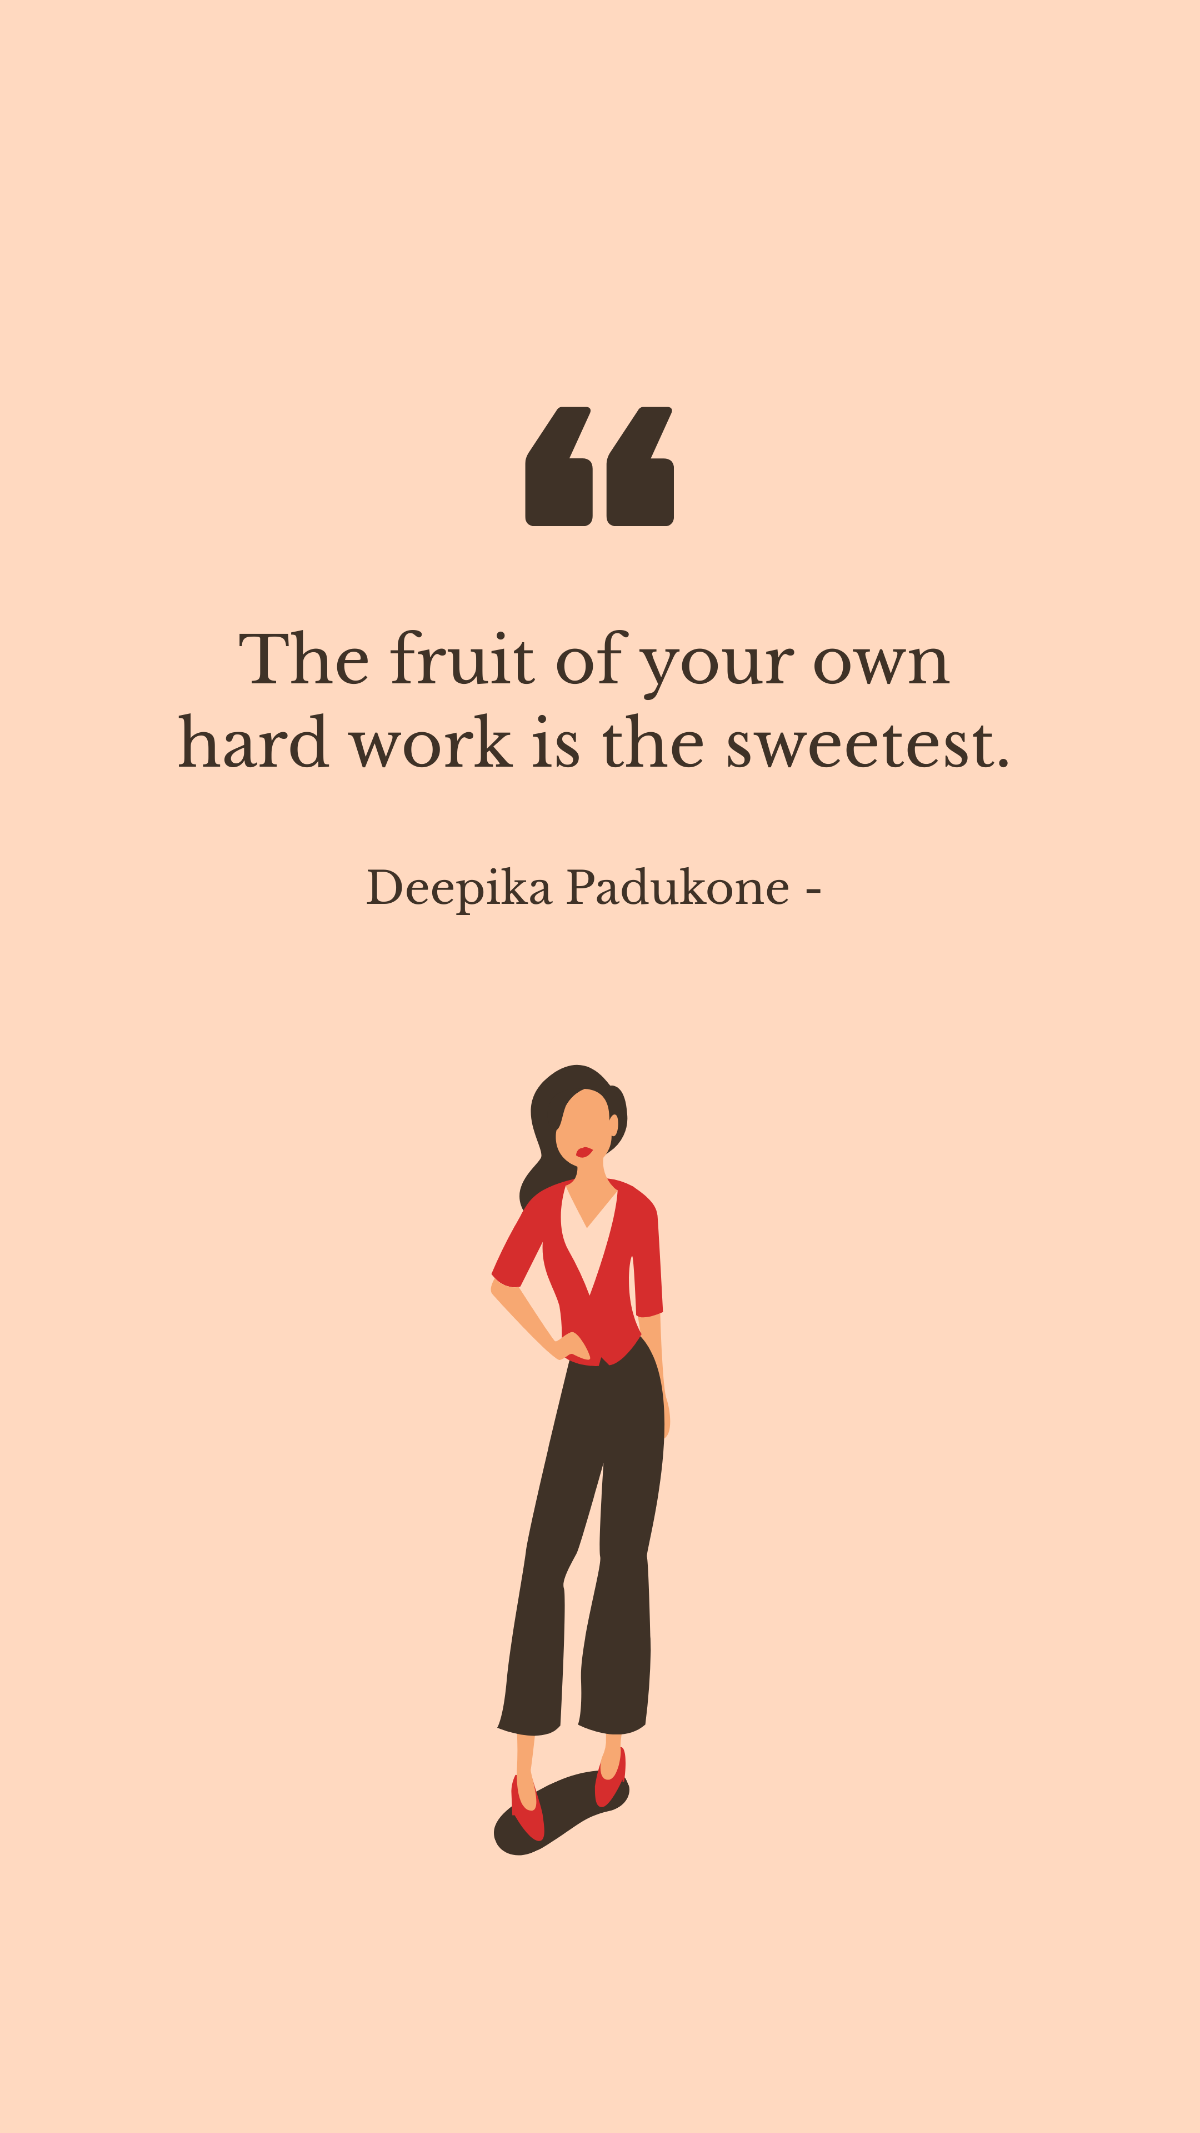 Free Deepika Padukone - The fruit of your own hard work is the sweetest. Template